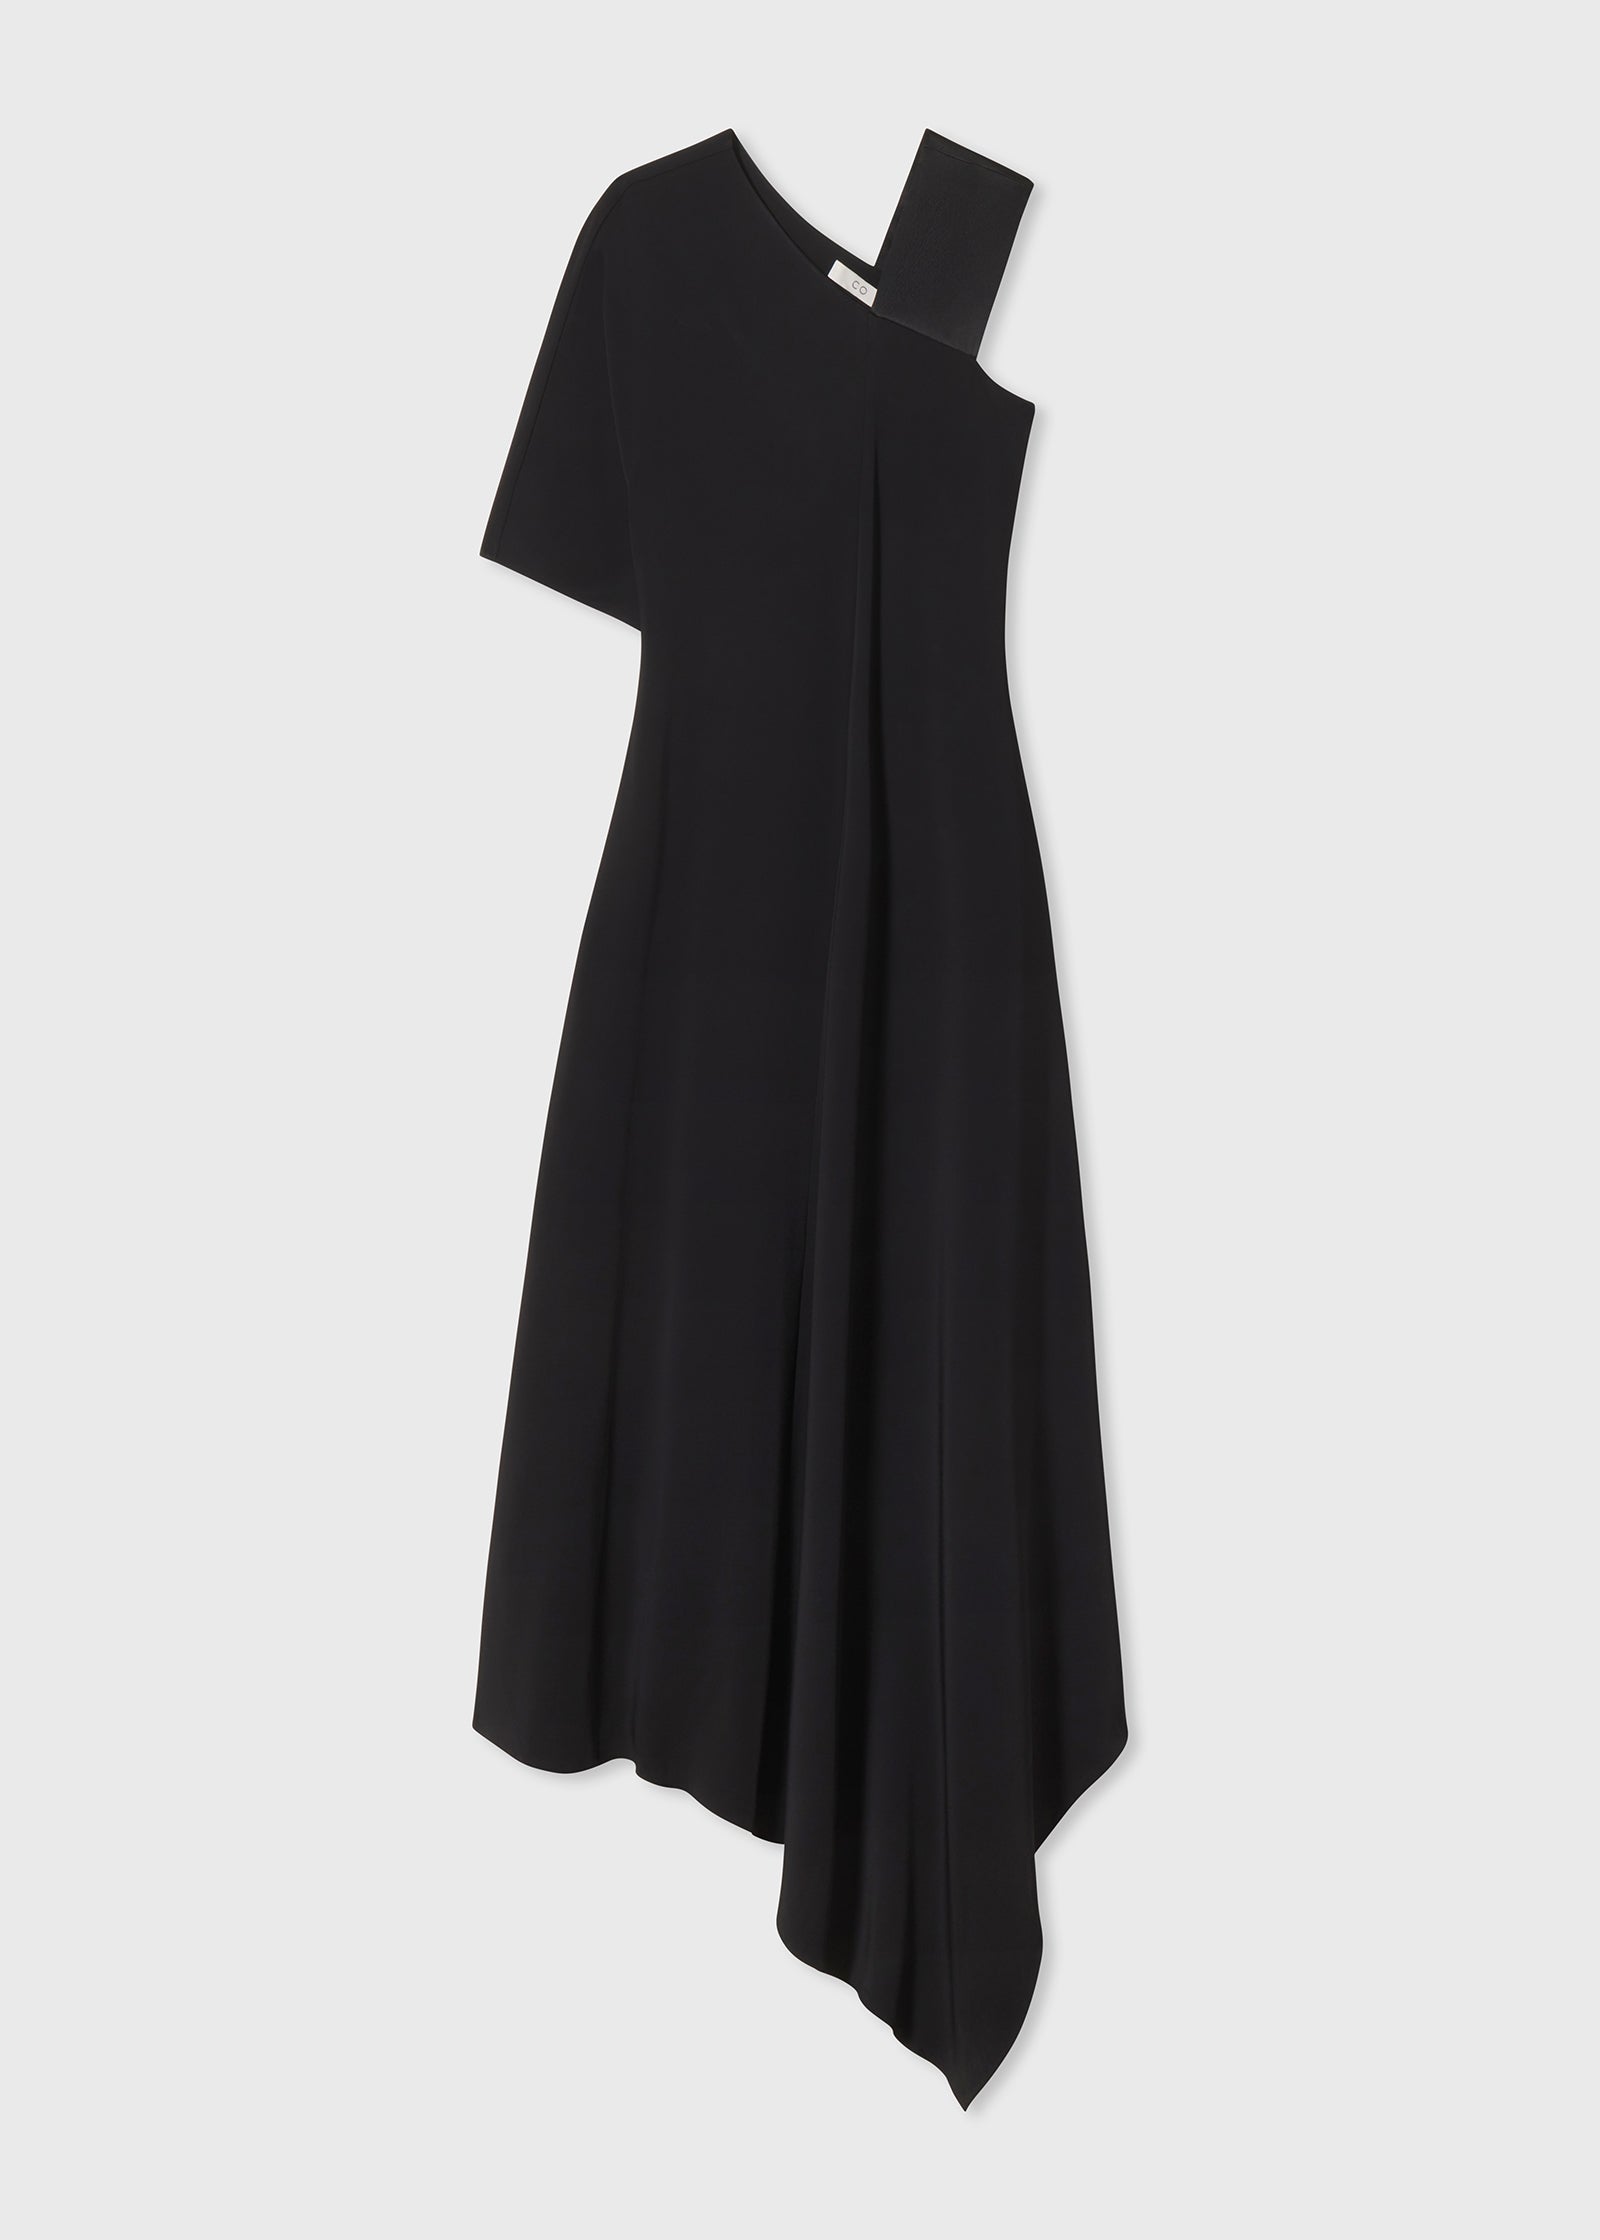 Napkin Dress in Stretch Viscose Crepe - Black - CO Collections